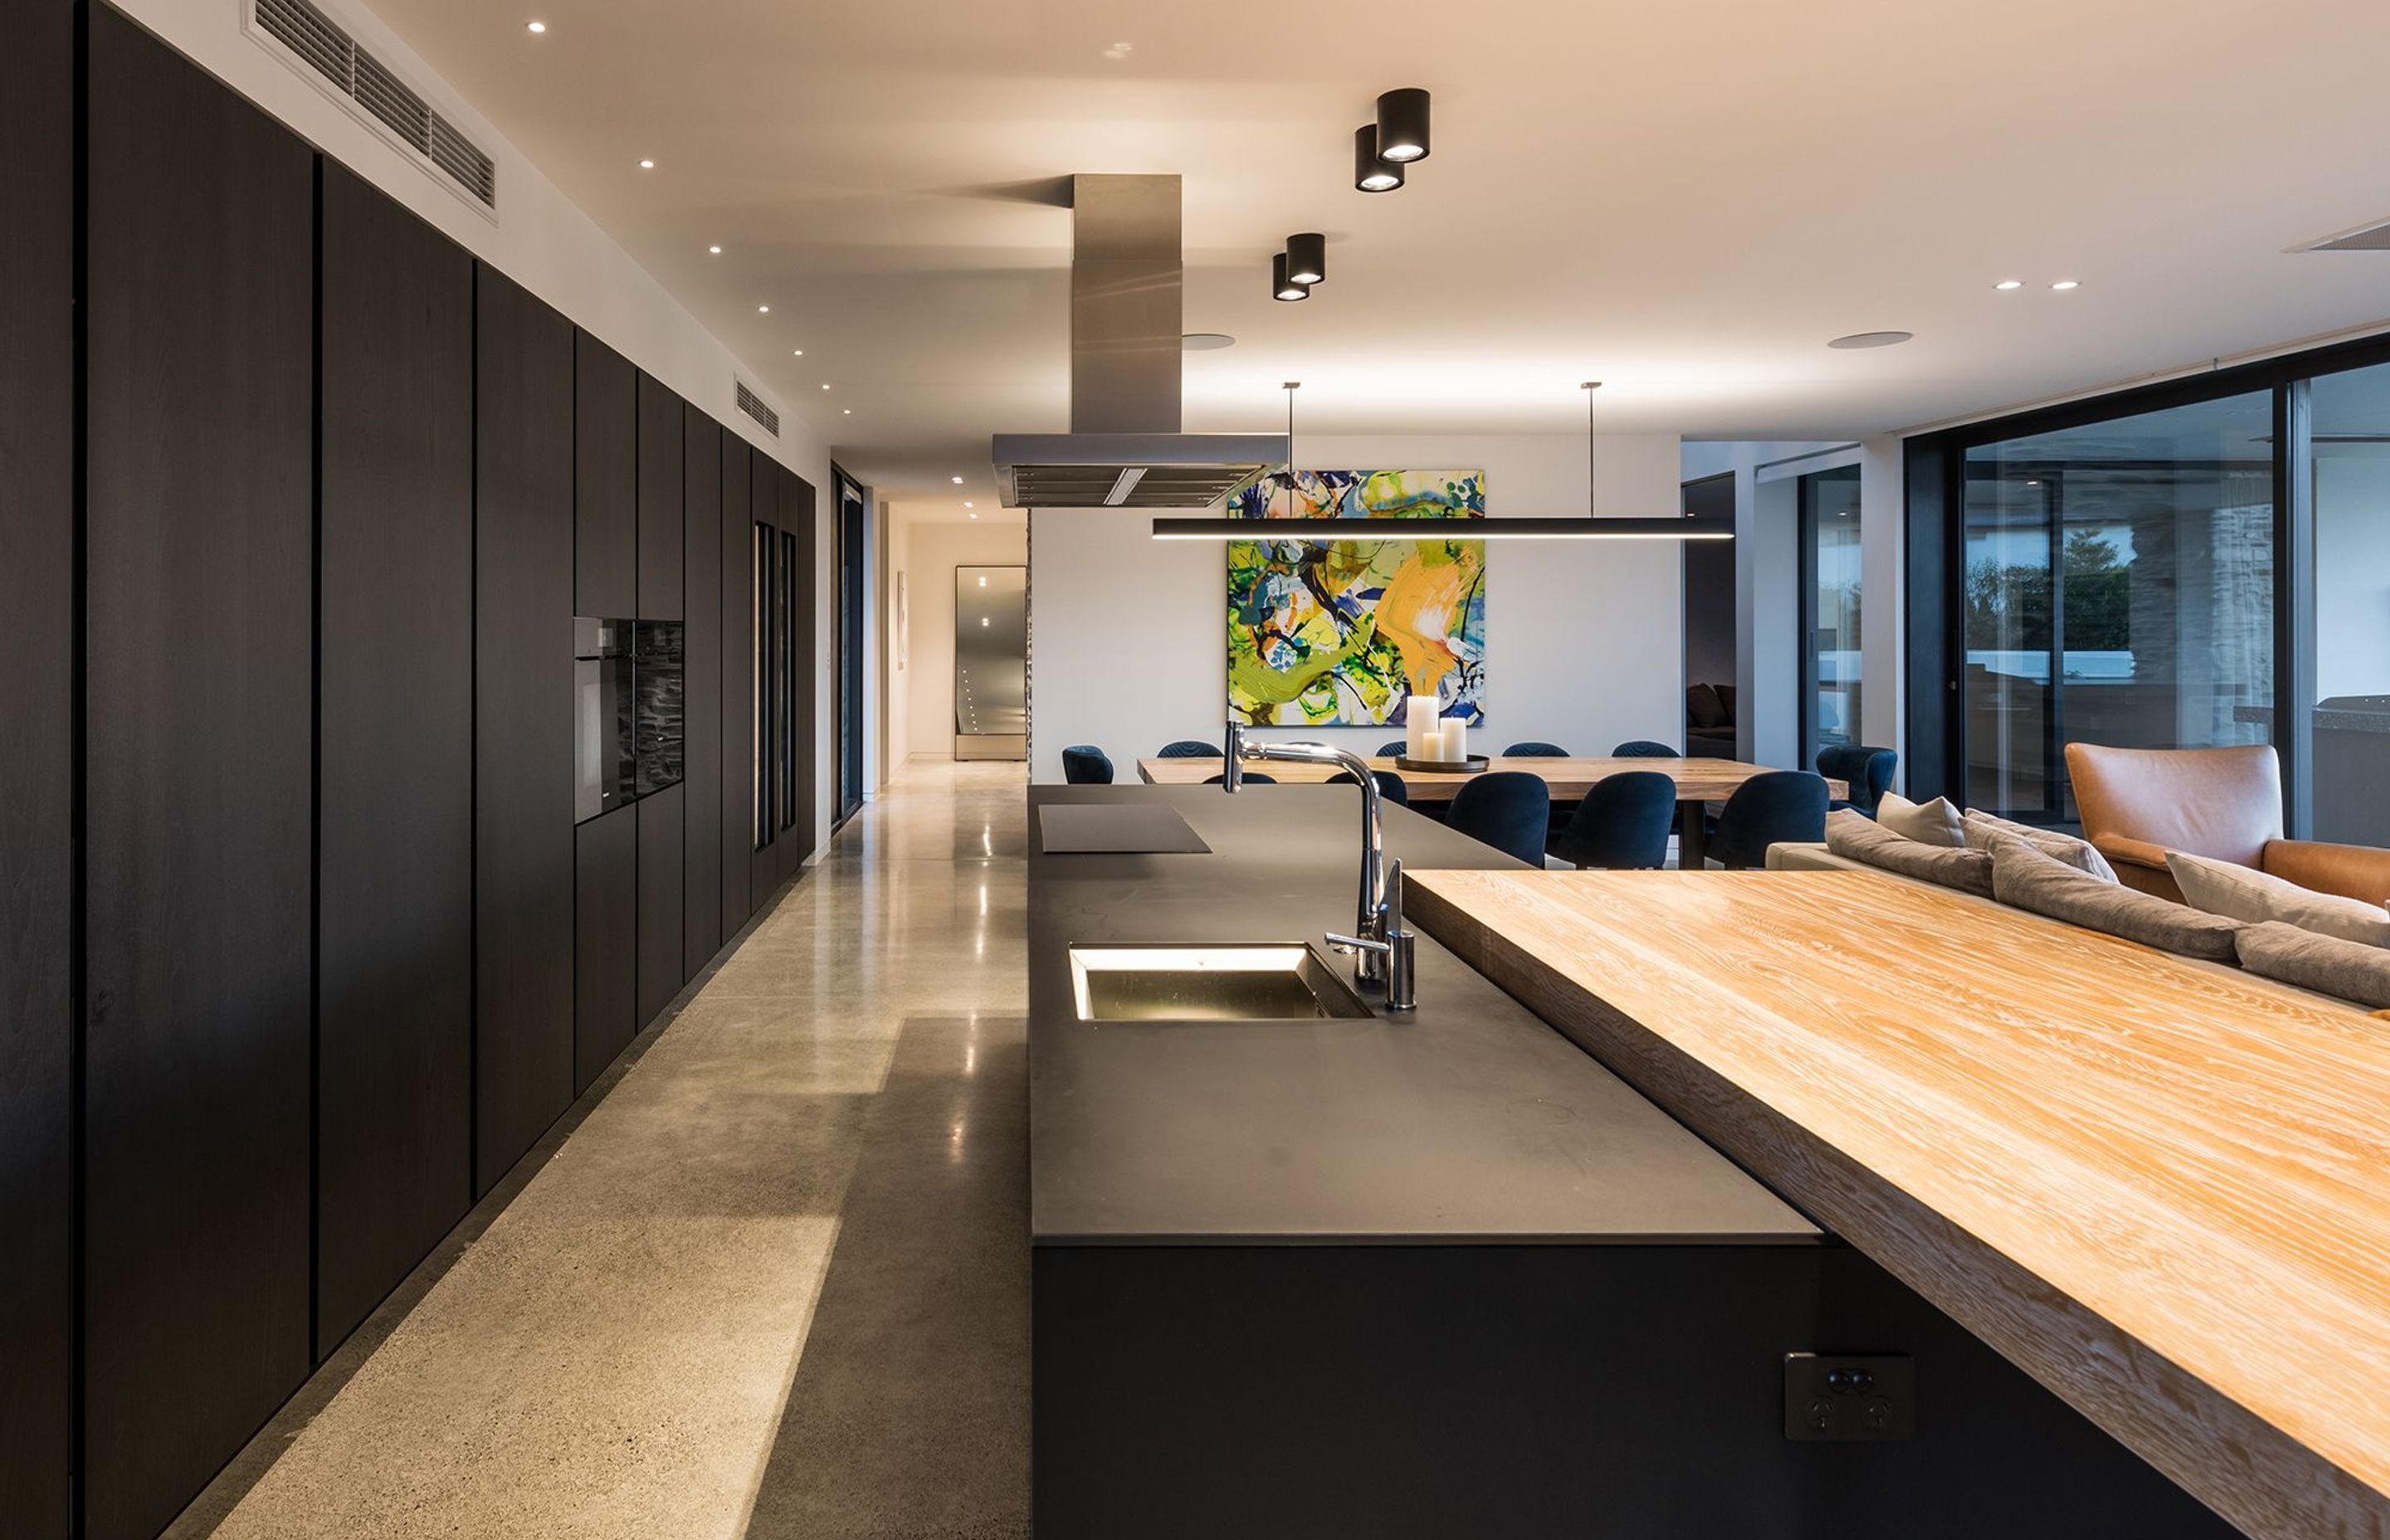 The Poliform kitchen features an expansive wall of cabinetry with built-in wine fridges and a long black island with a chunky timber breakfast bar.